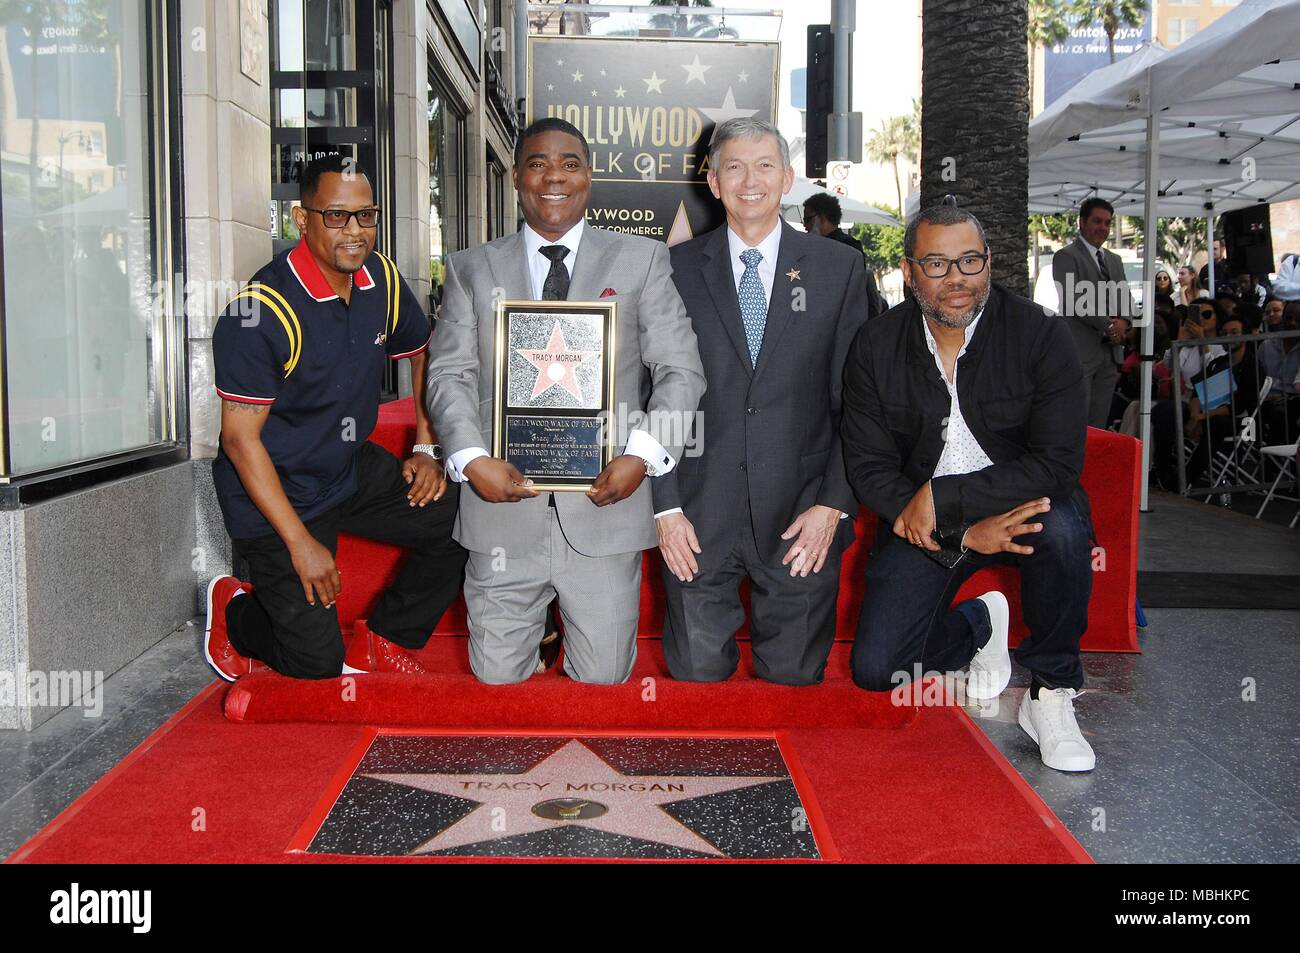 Los Angeles, CA, USA. 10th Apr, 2018. Martin Lawrence, Tracy Morgan, Leron Gubler, Jordan Peele at the induction for Star on the Hollywood Walk of Fame for Tracy Morgan, Hollywood Boulevard,